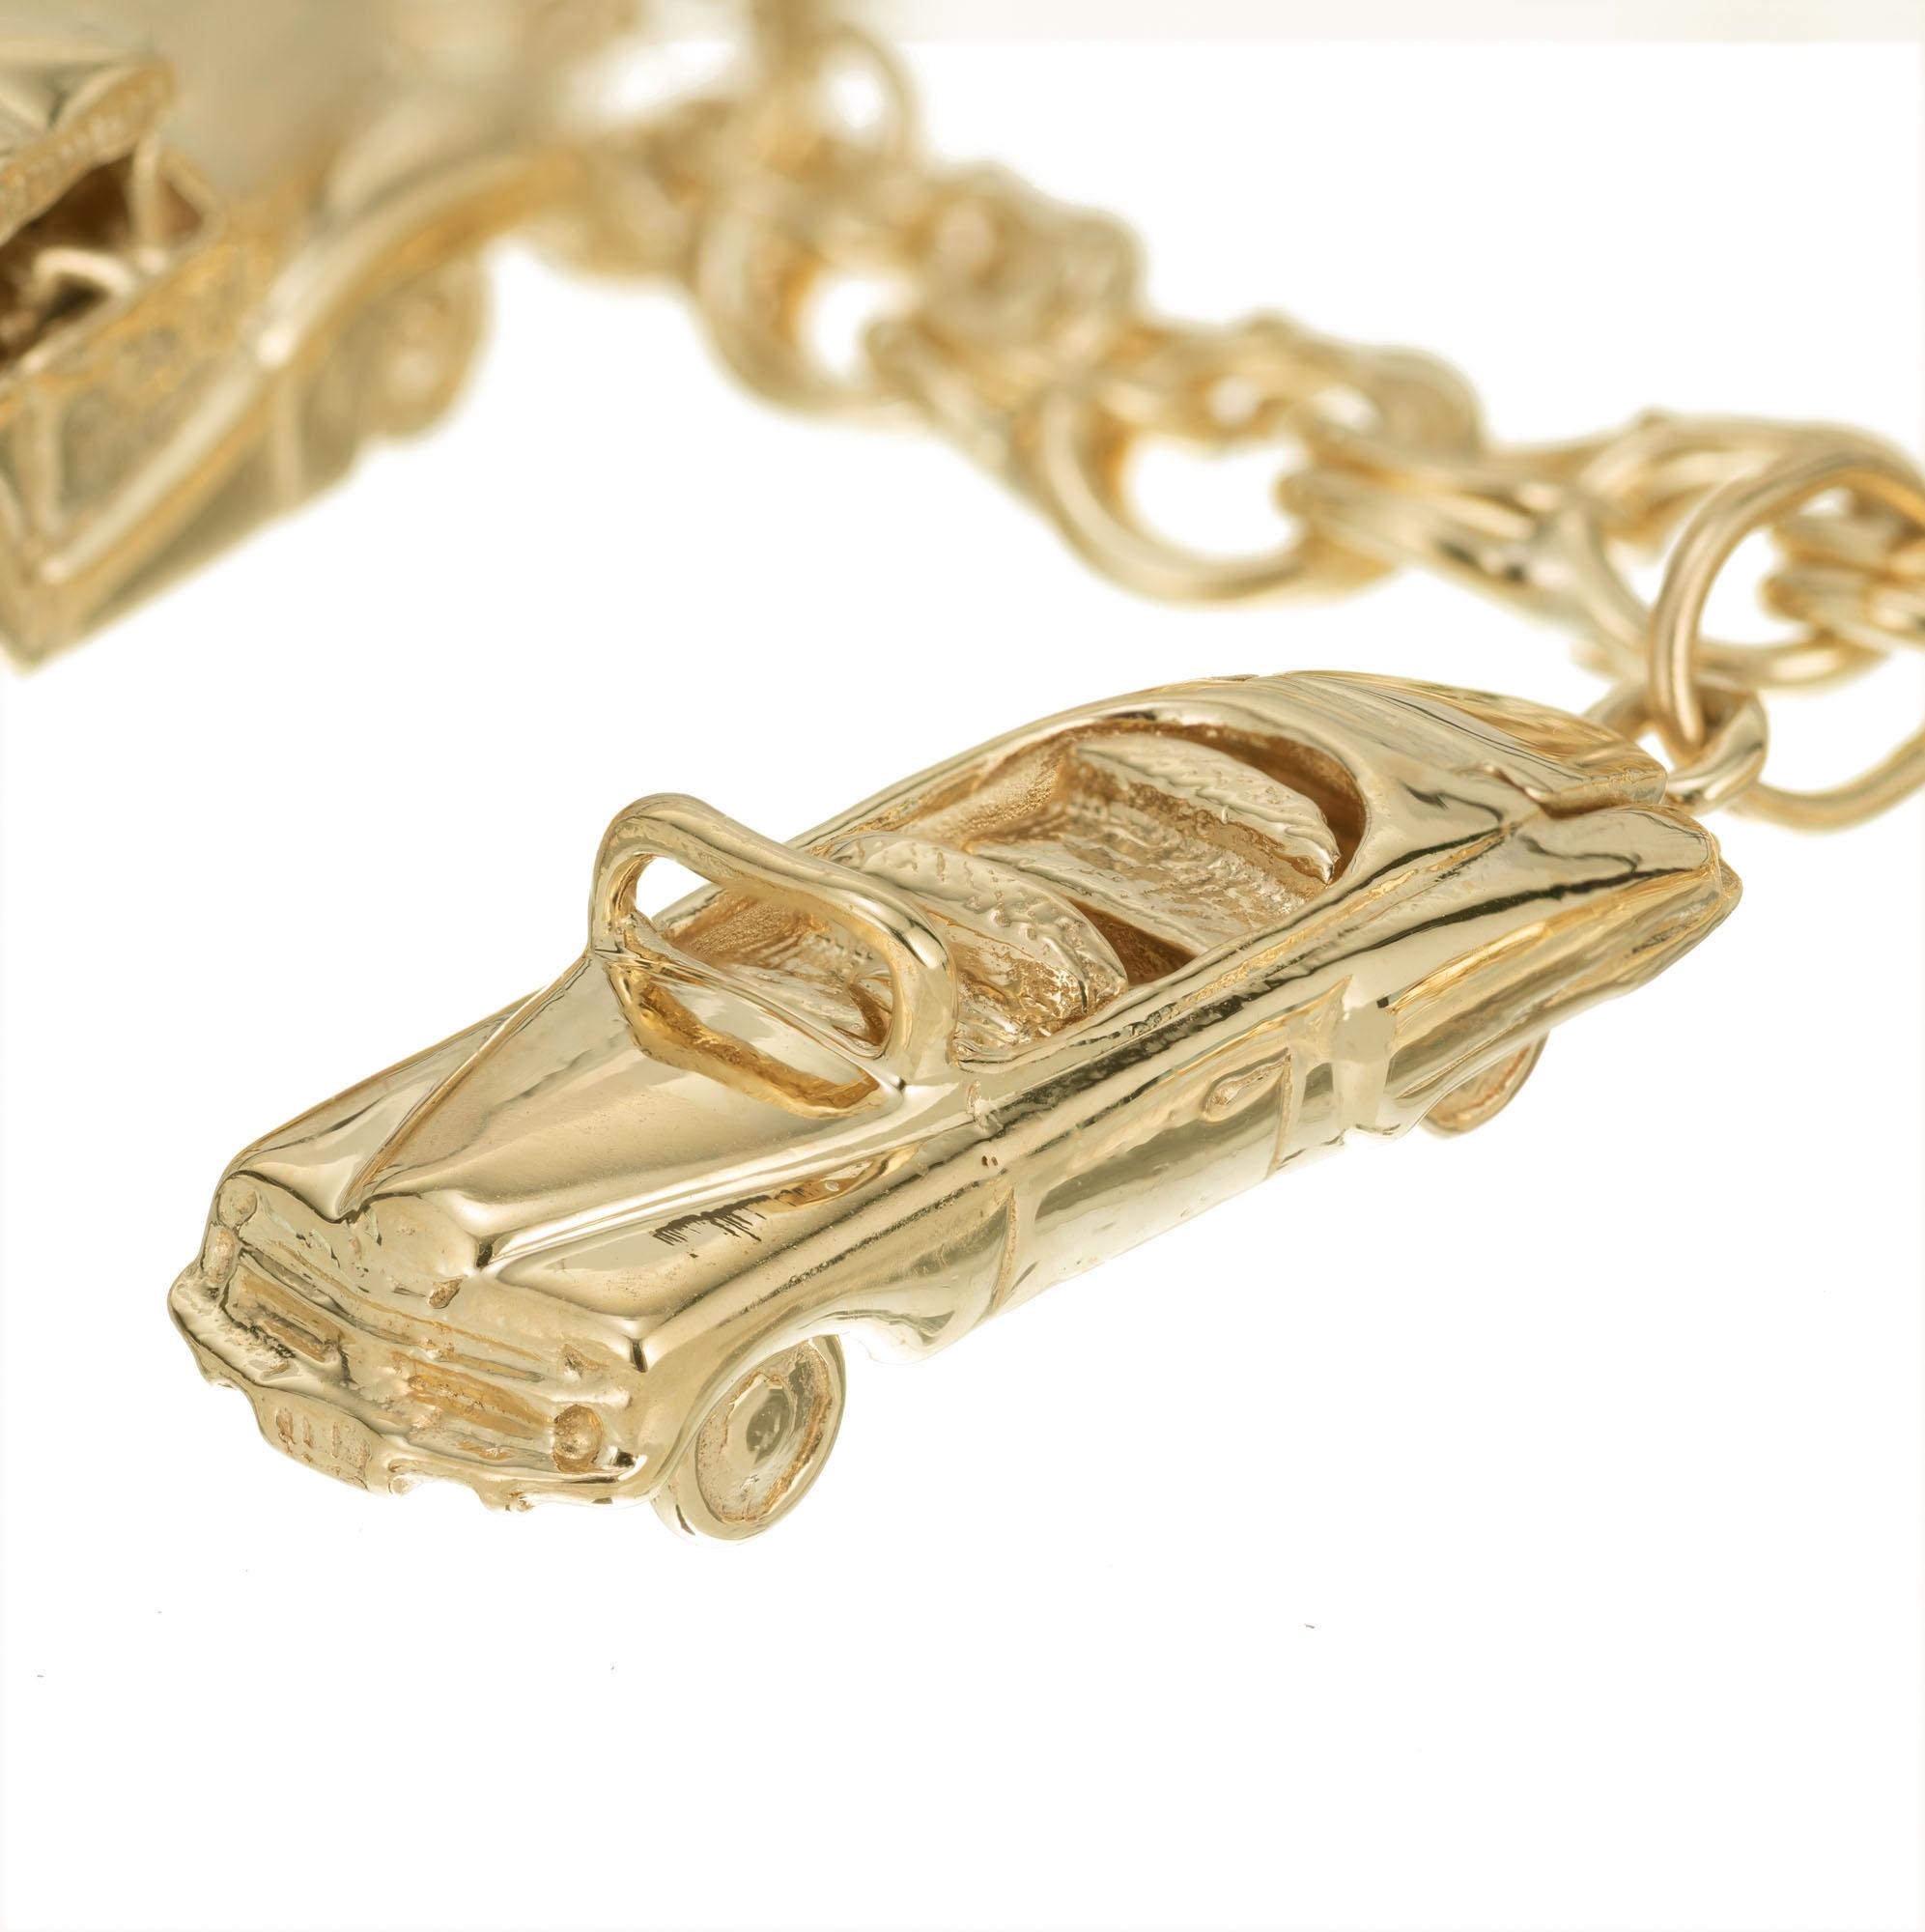 Six car 14k yellow gold charm bracelet. Open double spiral link with a later lobster catch. 7 inches in lengh.

14k yellow gold 
Stamped: 14k
38.1 grams
Bracelet: 7 Inches
Width: 7.1mm
Thickness/ depth: 3mm
